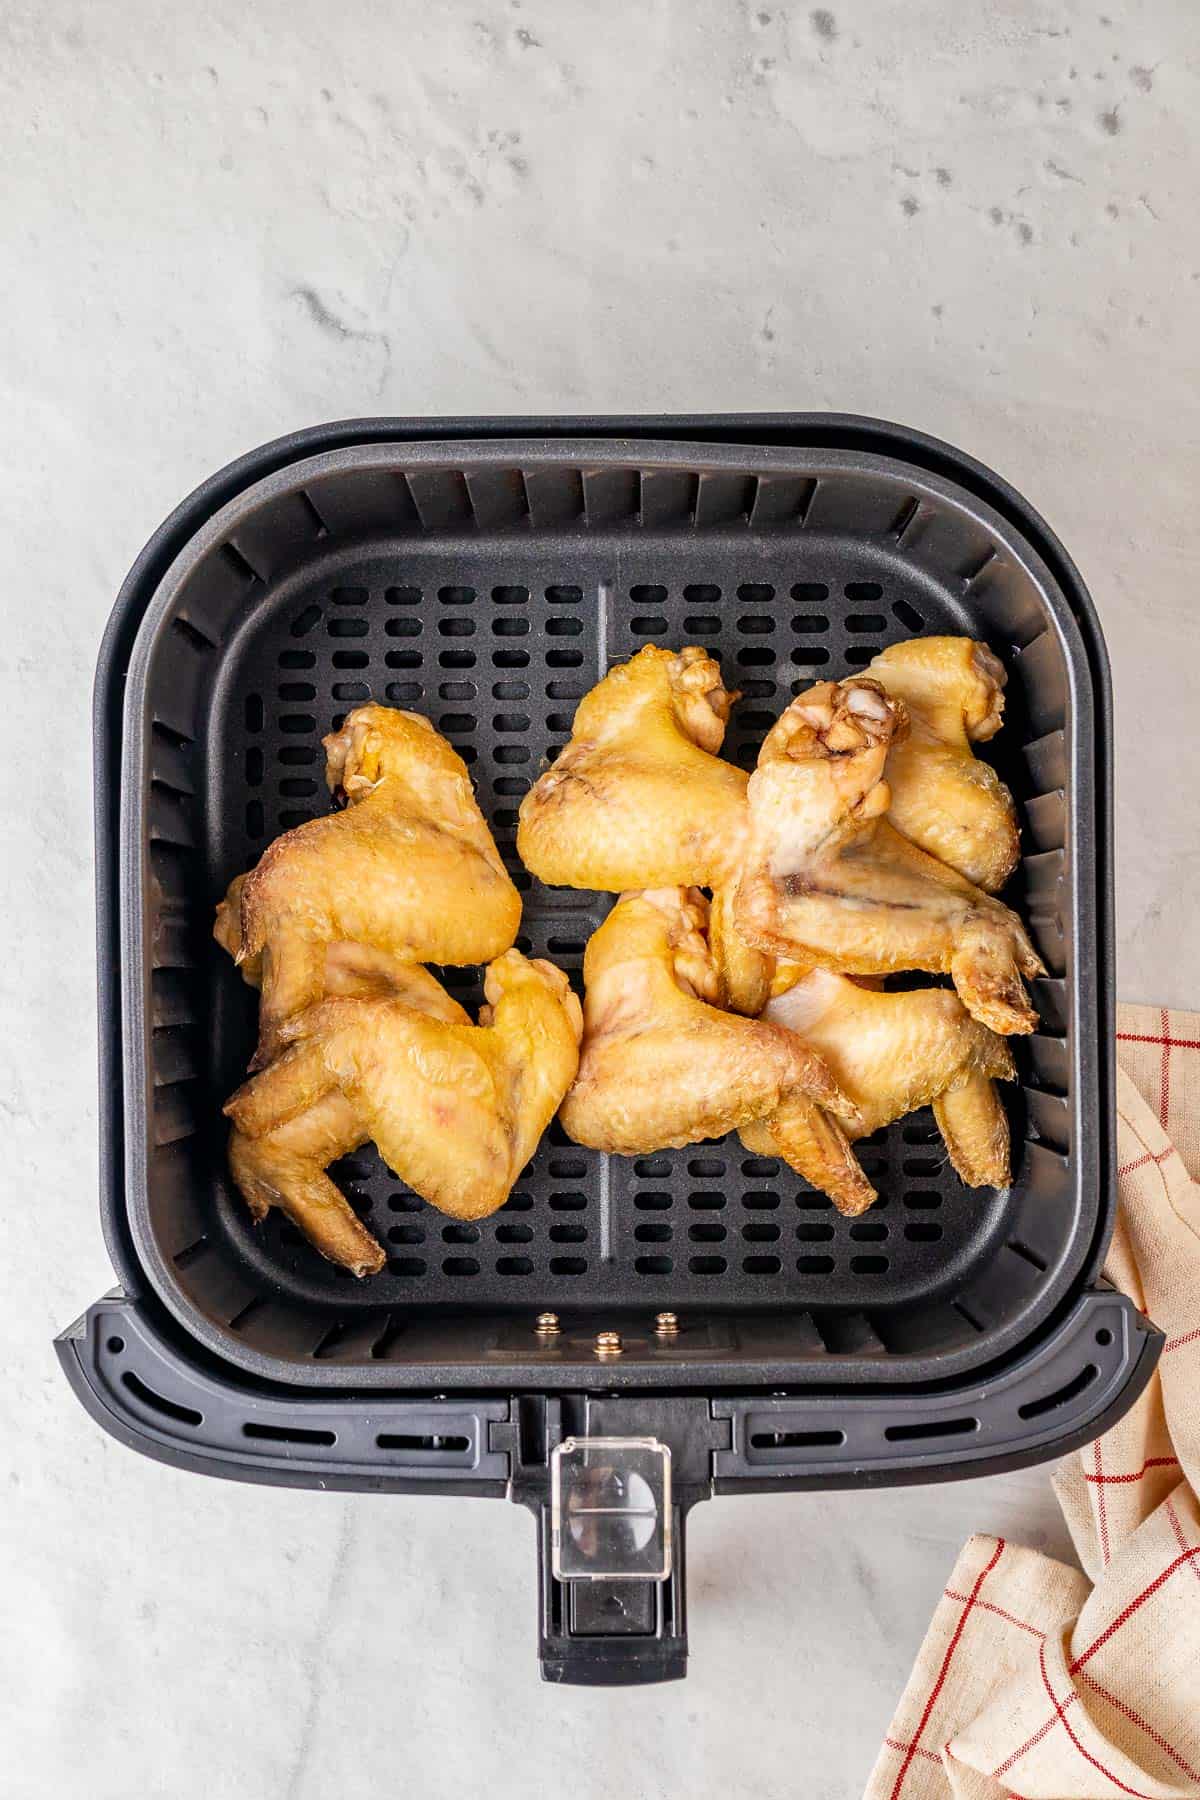 defrosted chicken wings in the air fryer basket